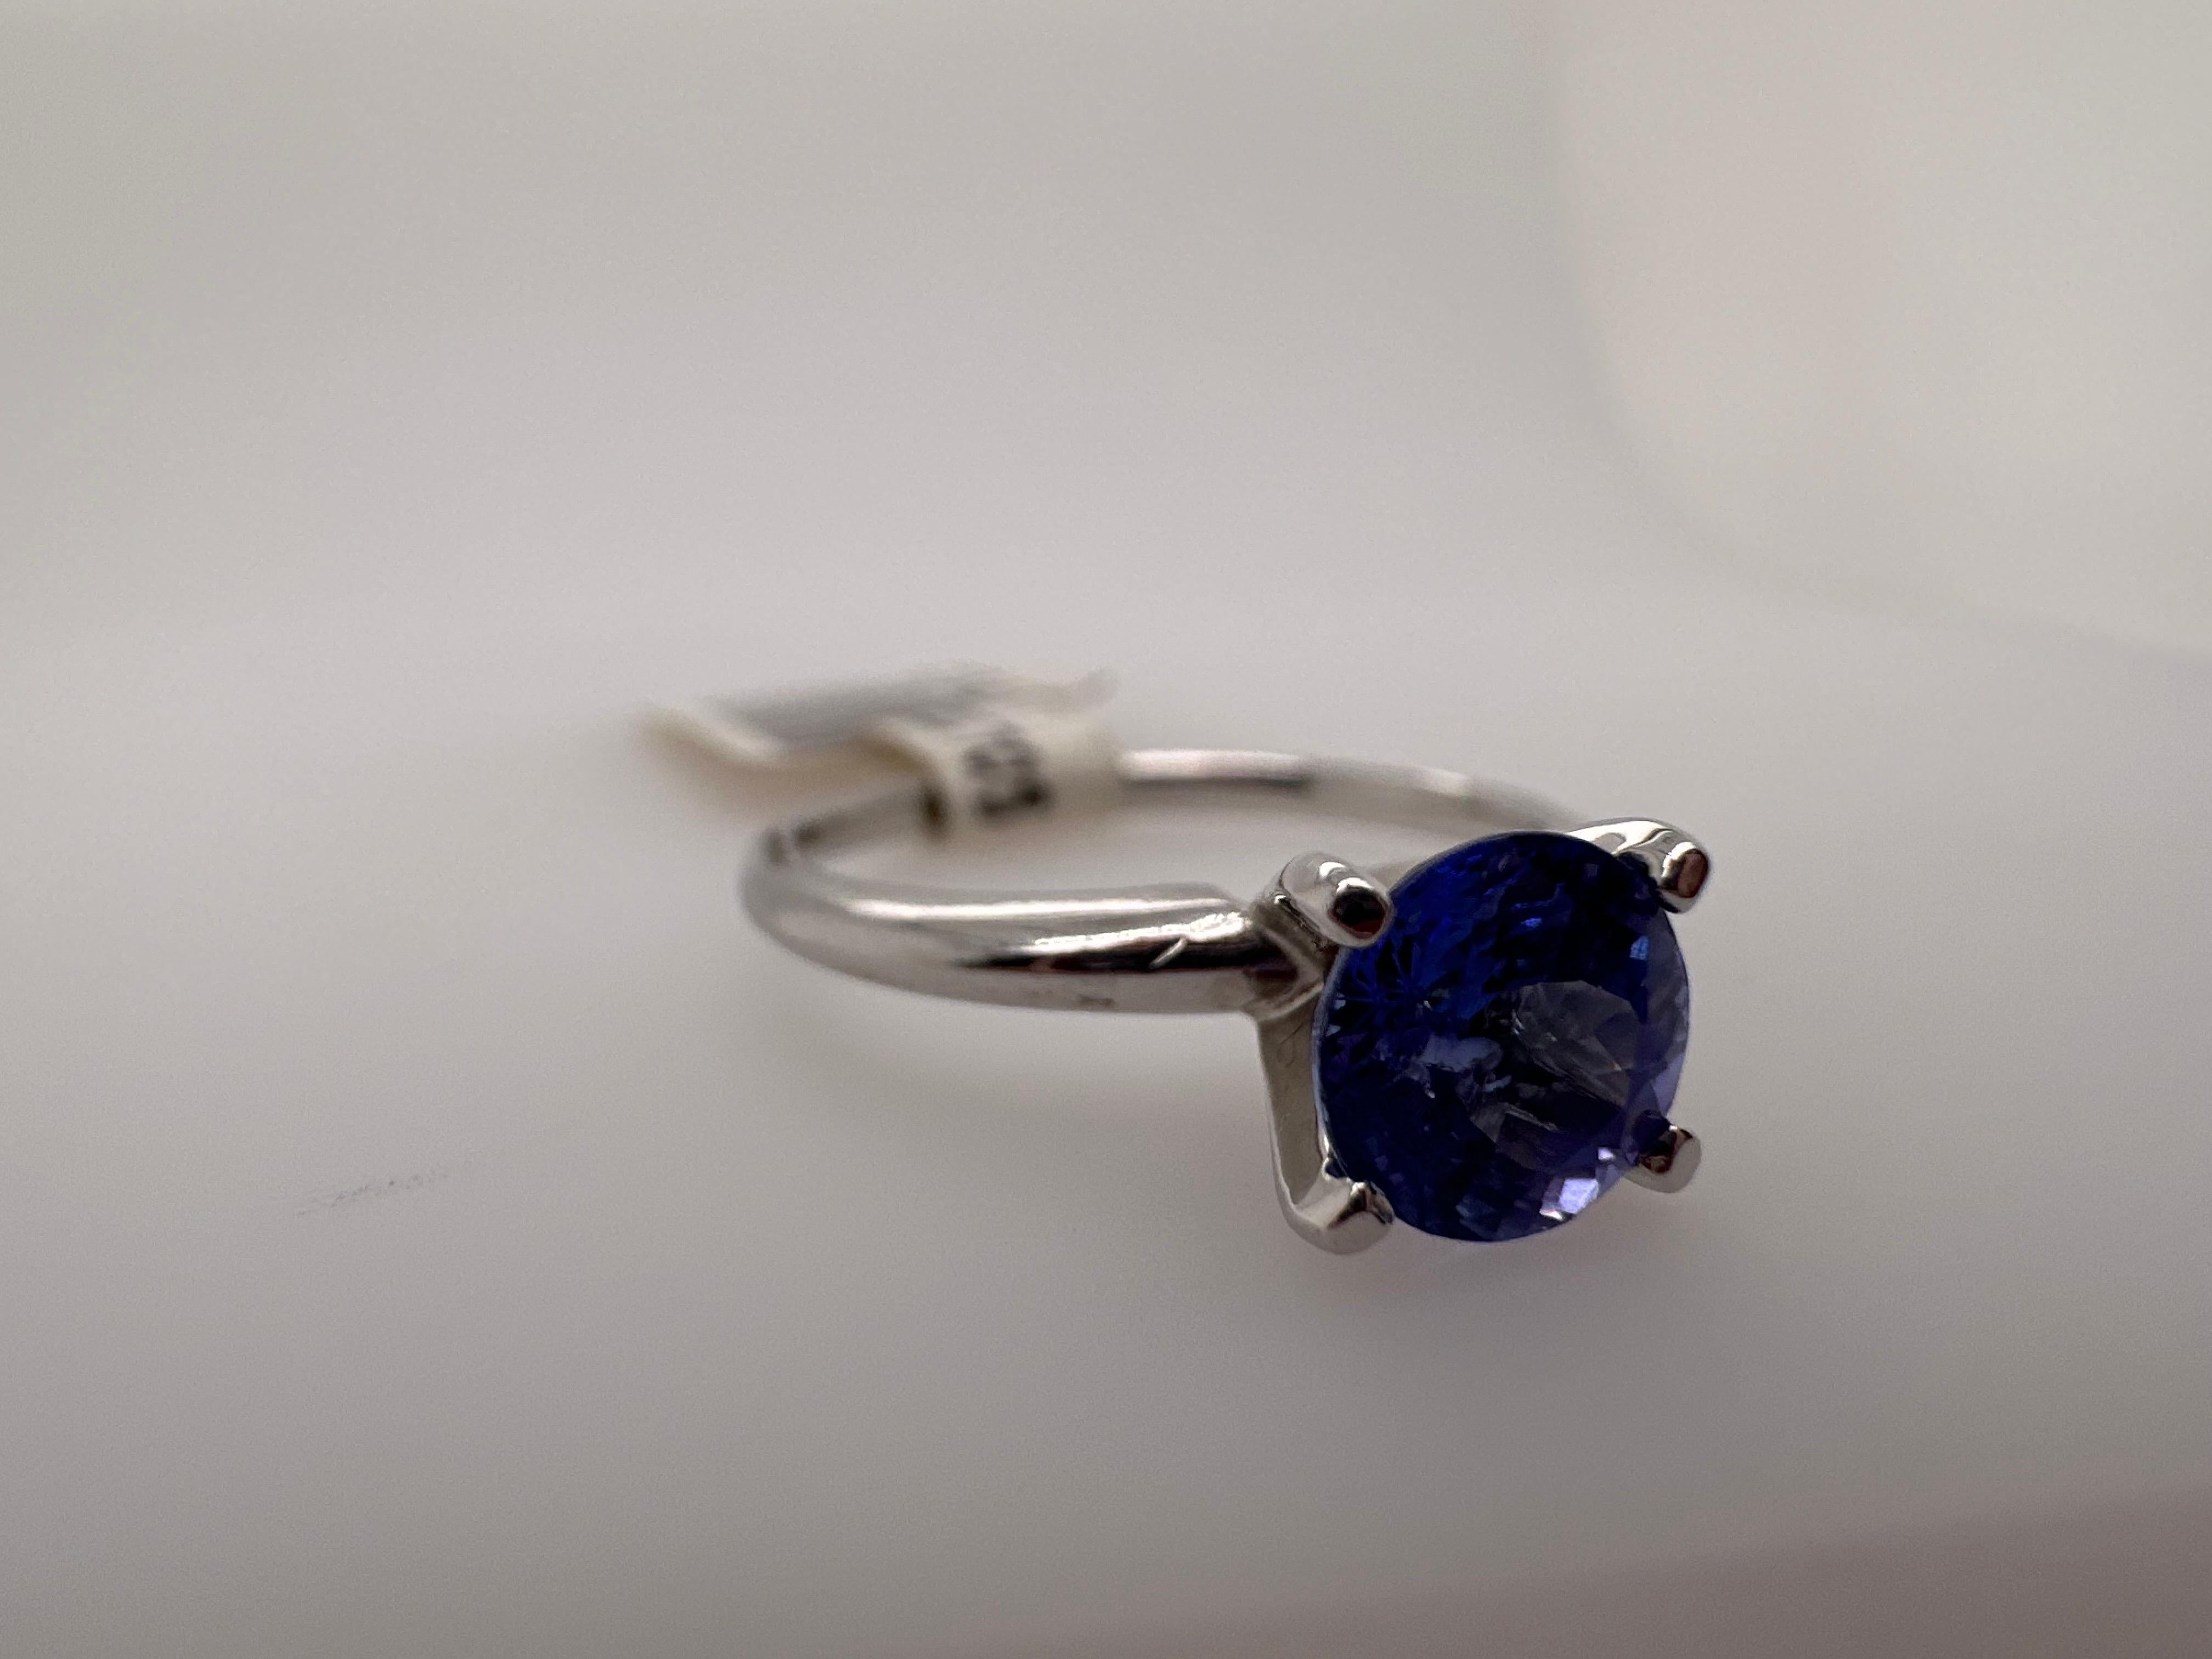 Solitaire ring made with 1ct tanzanite in 14Kt white gold.

Metal Type: 14KT 

Natural Tanzanite(s):
Color: Violet
Cut:Roound
Carat: 1.01ct
Clarity: Moderately Included

Certificate of authenticity comes with purchase

ABOUT US
We are a family-owned